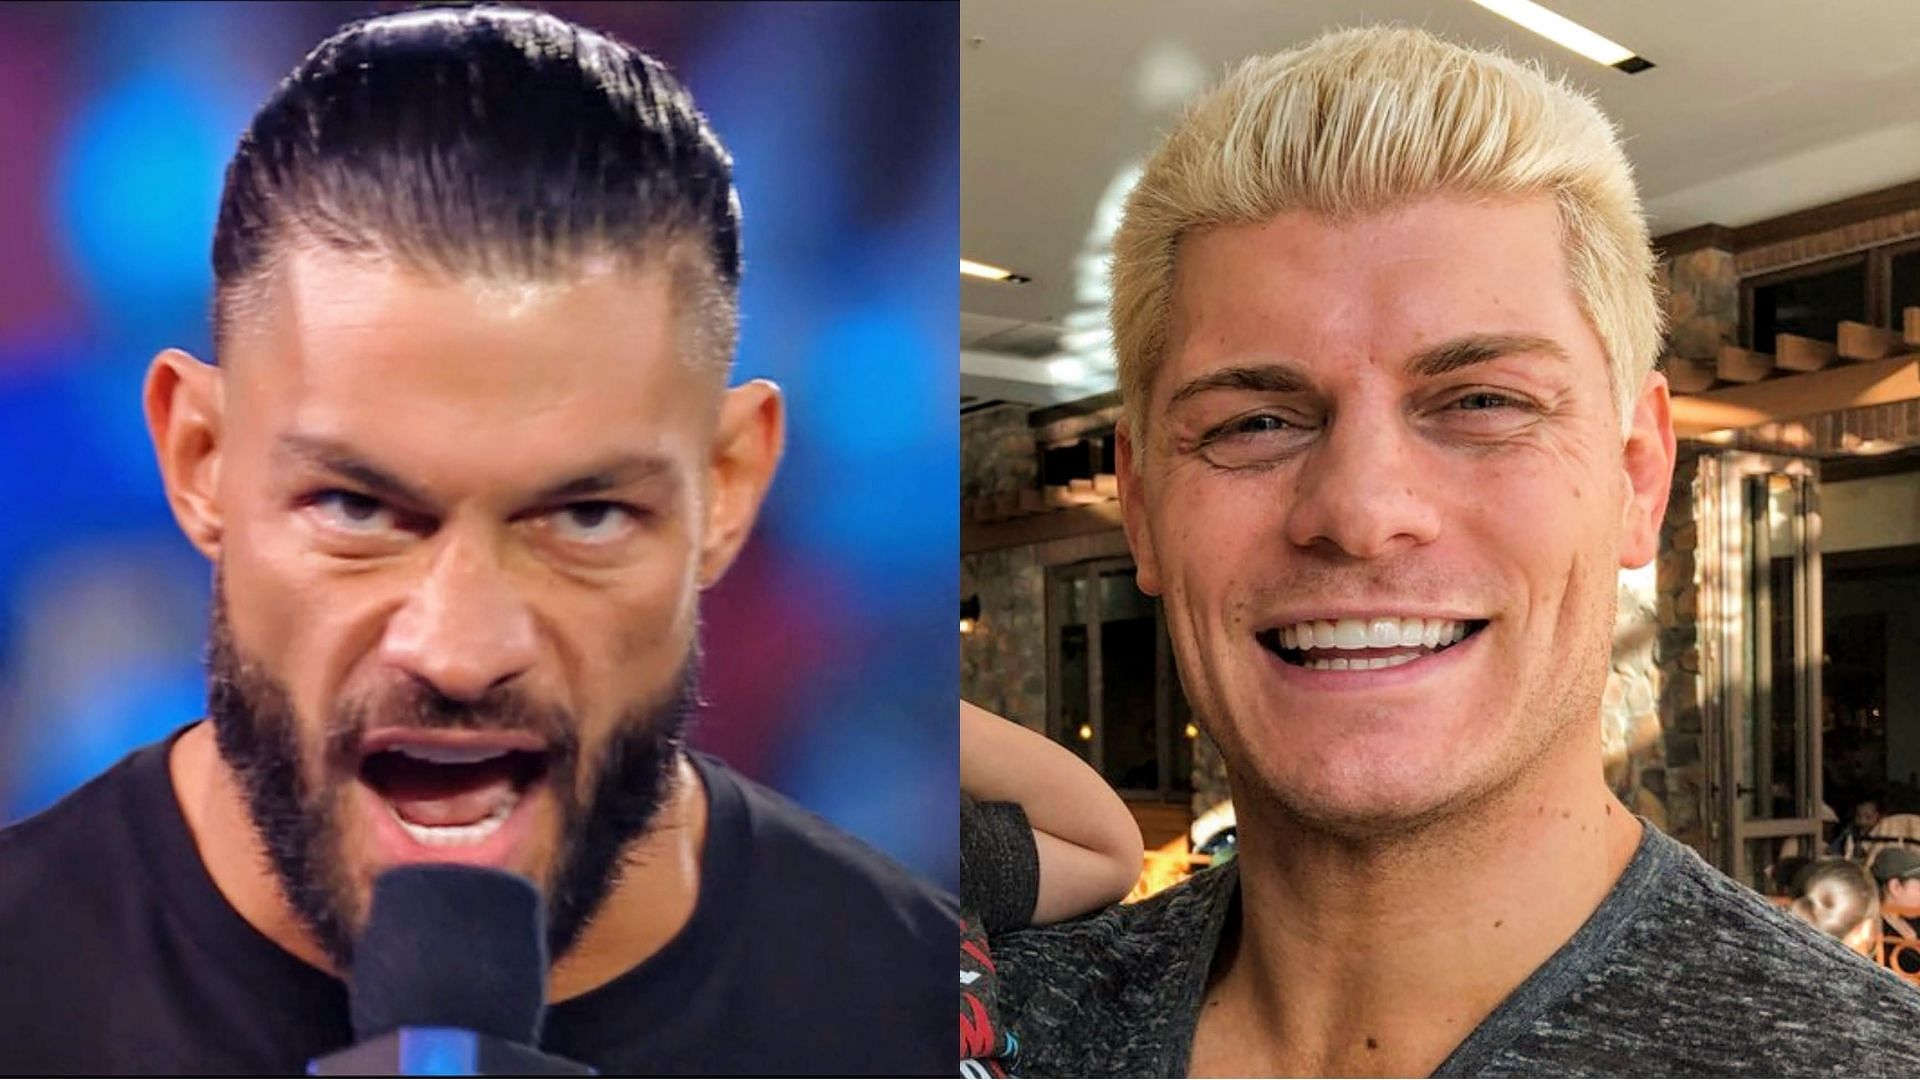 Roman Reigns (left) and Cody Rhodes (right)